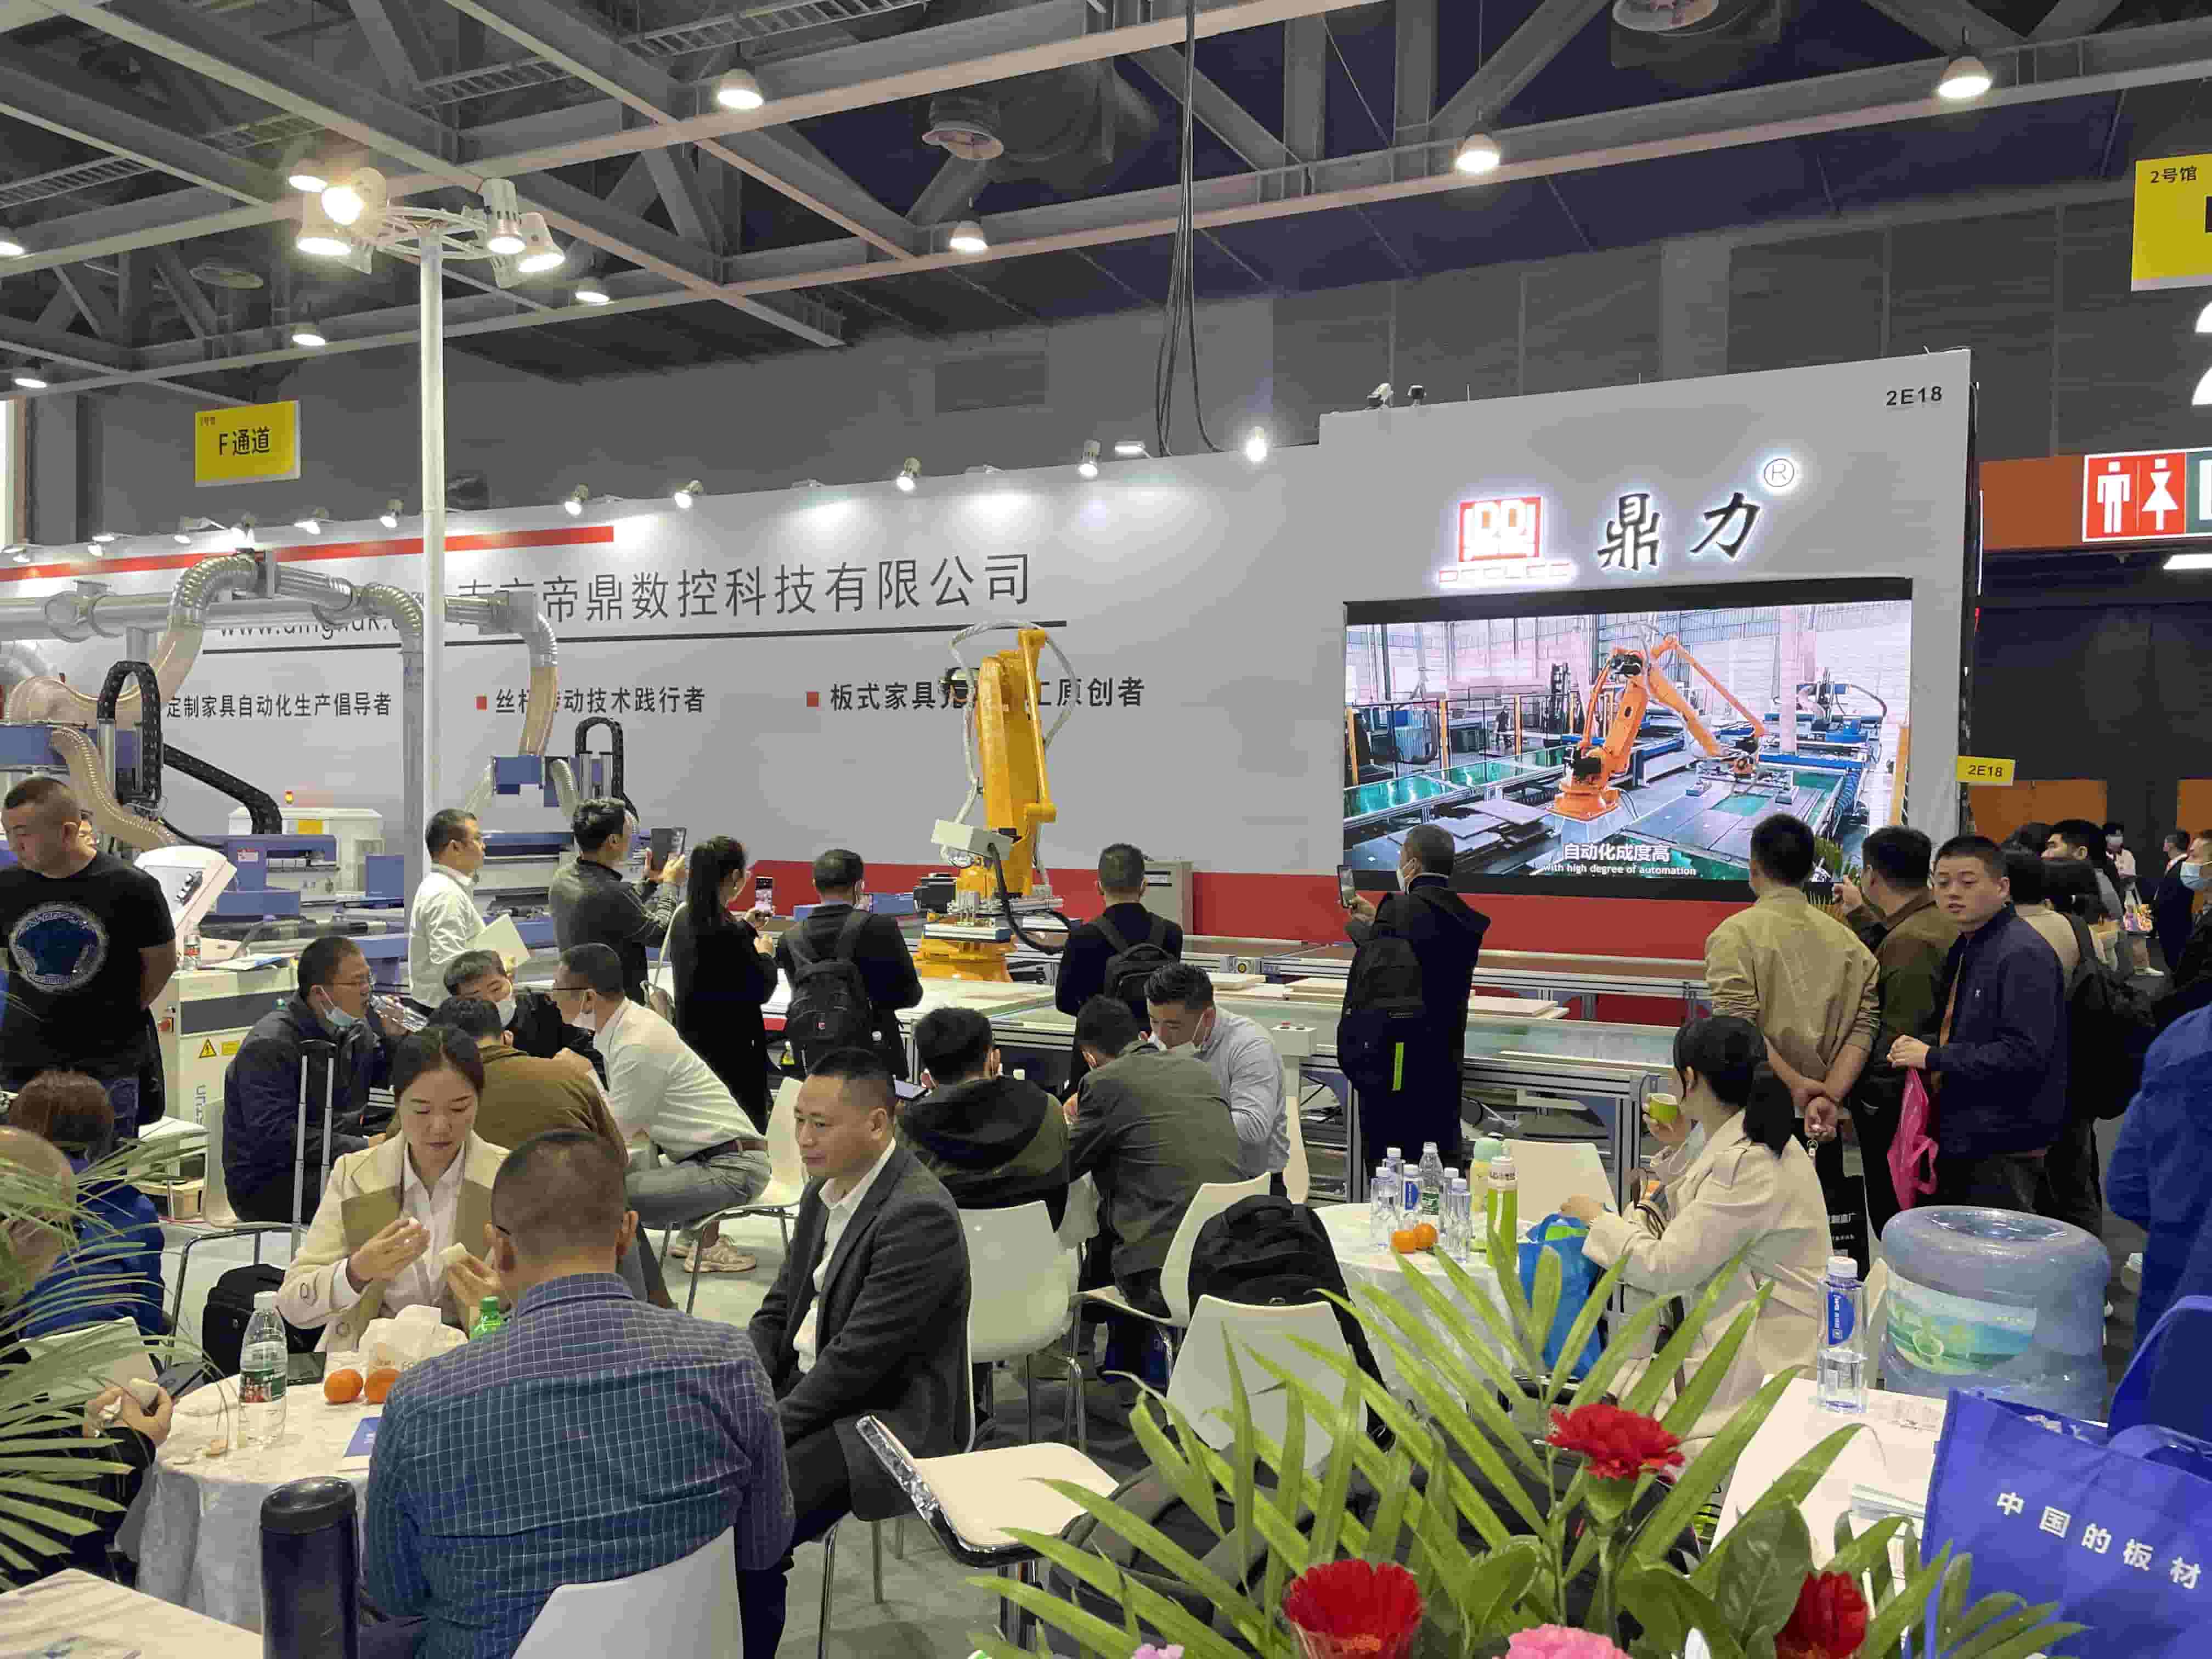 DEELEE CNC's exhibition in Guangzhou has successfully concluded